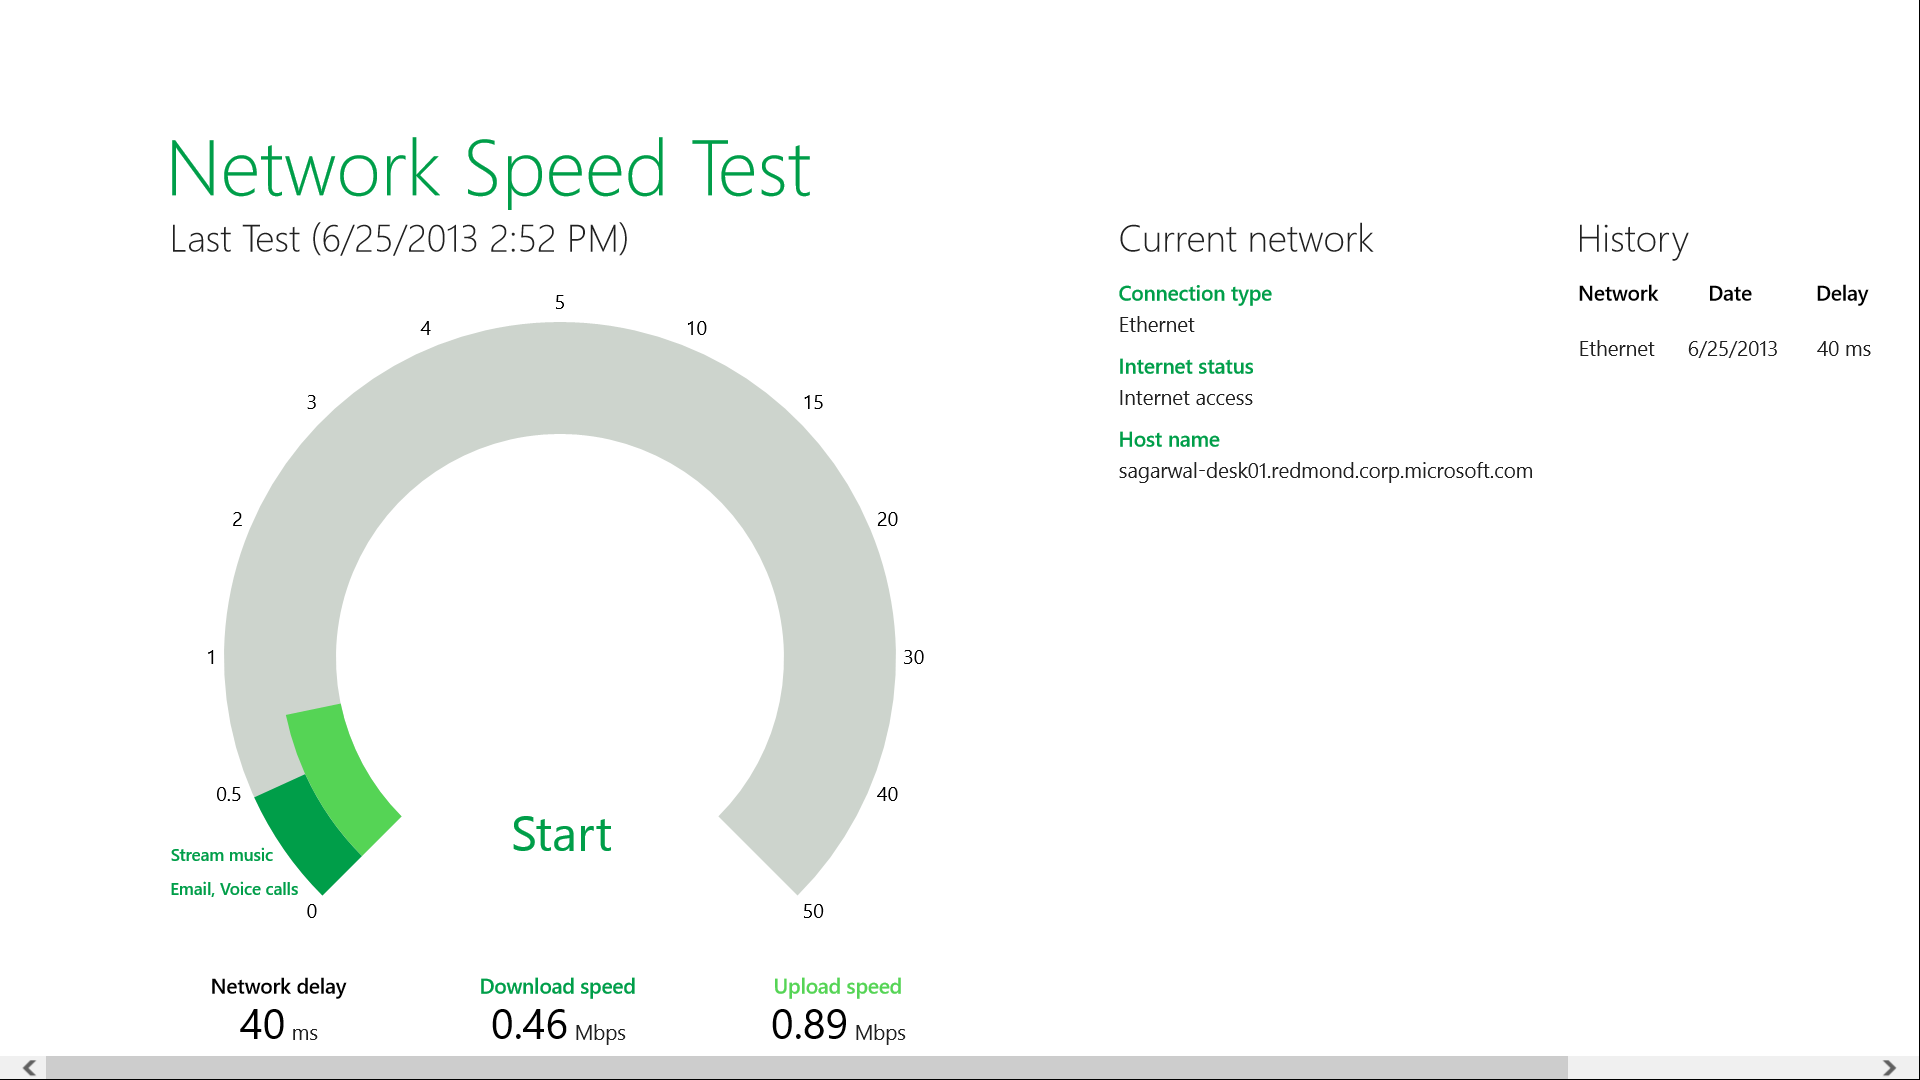 1.	Press start and then wait for the speed tests to finish.